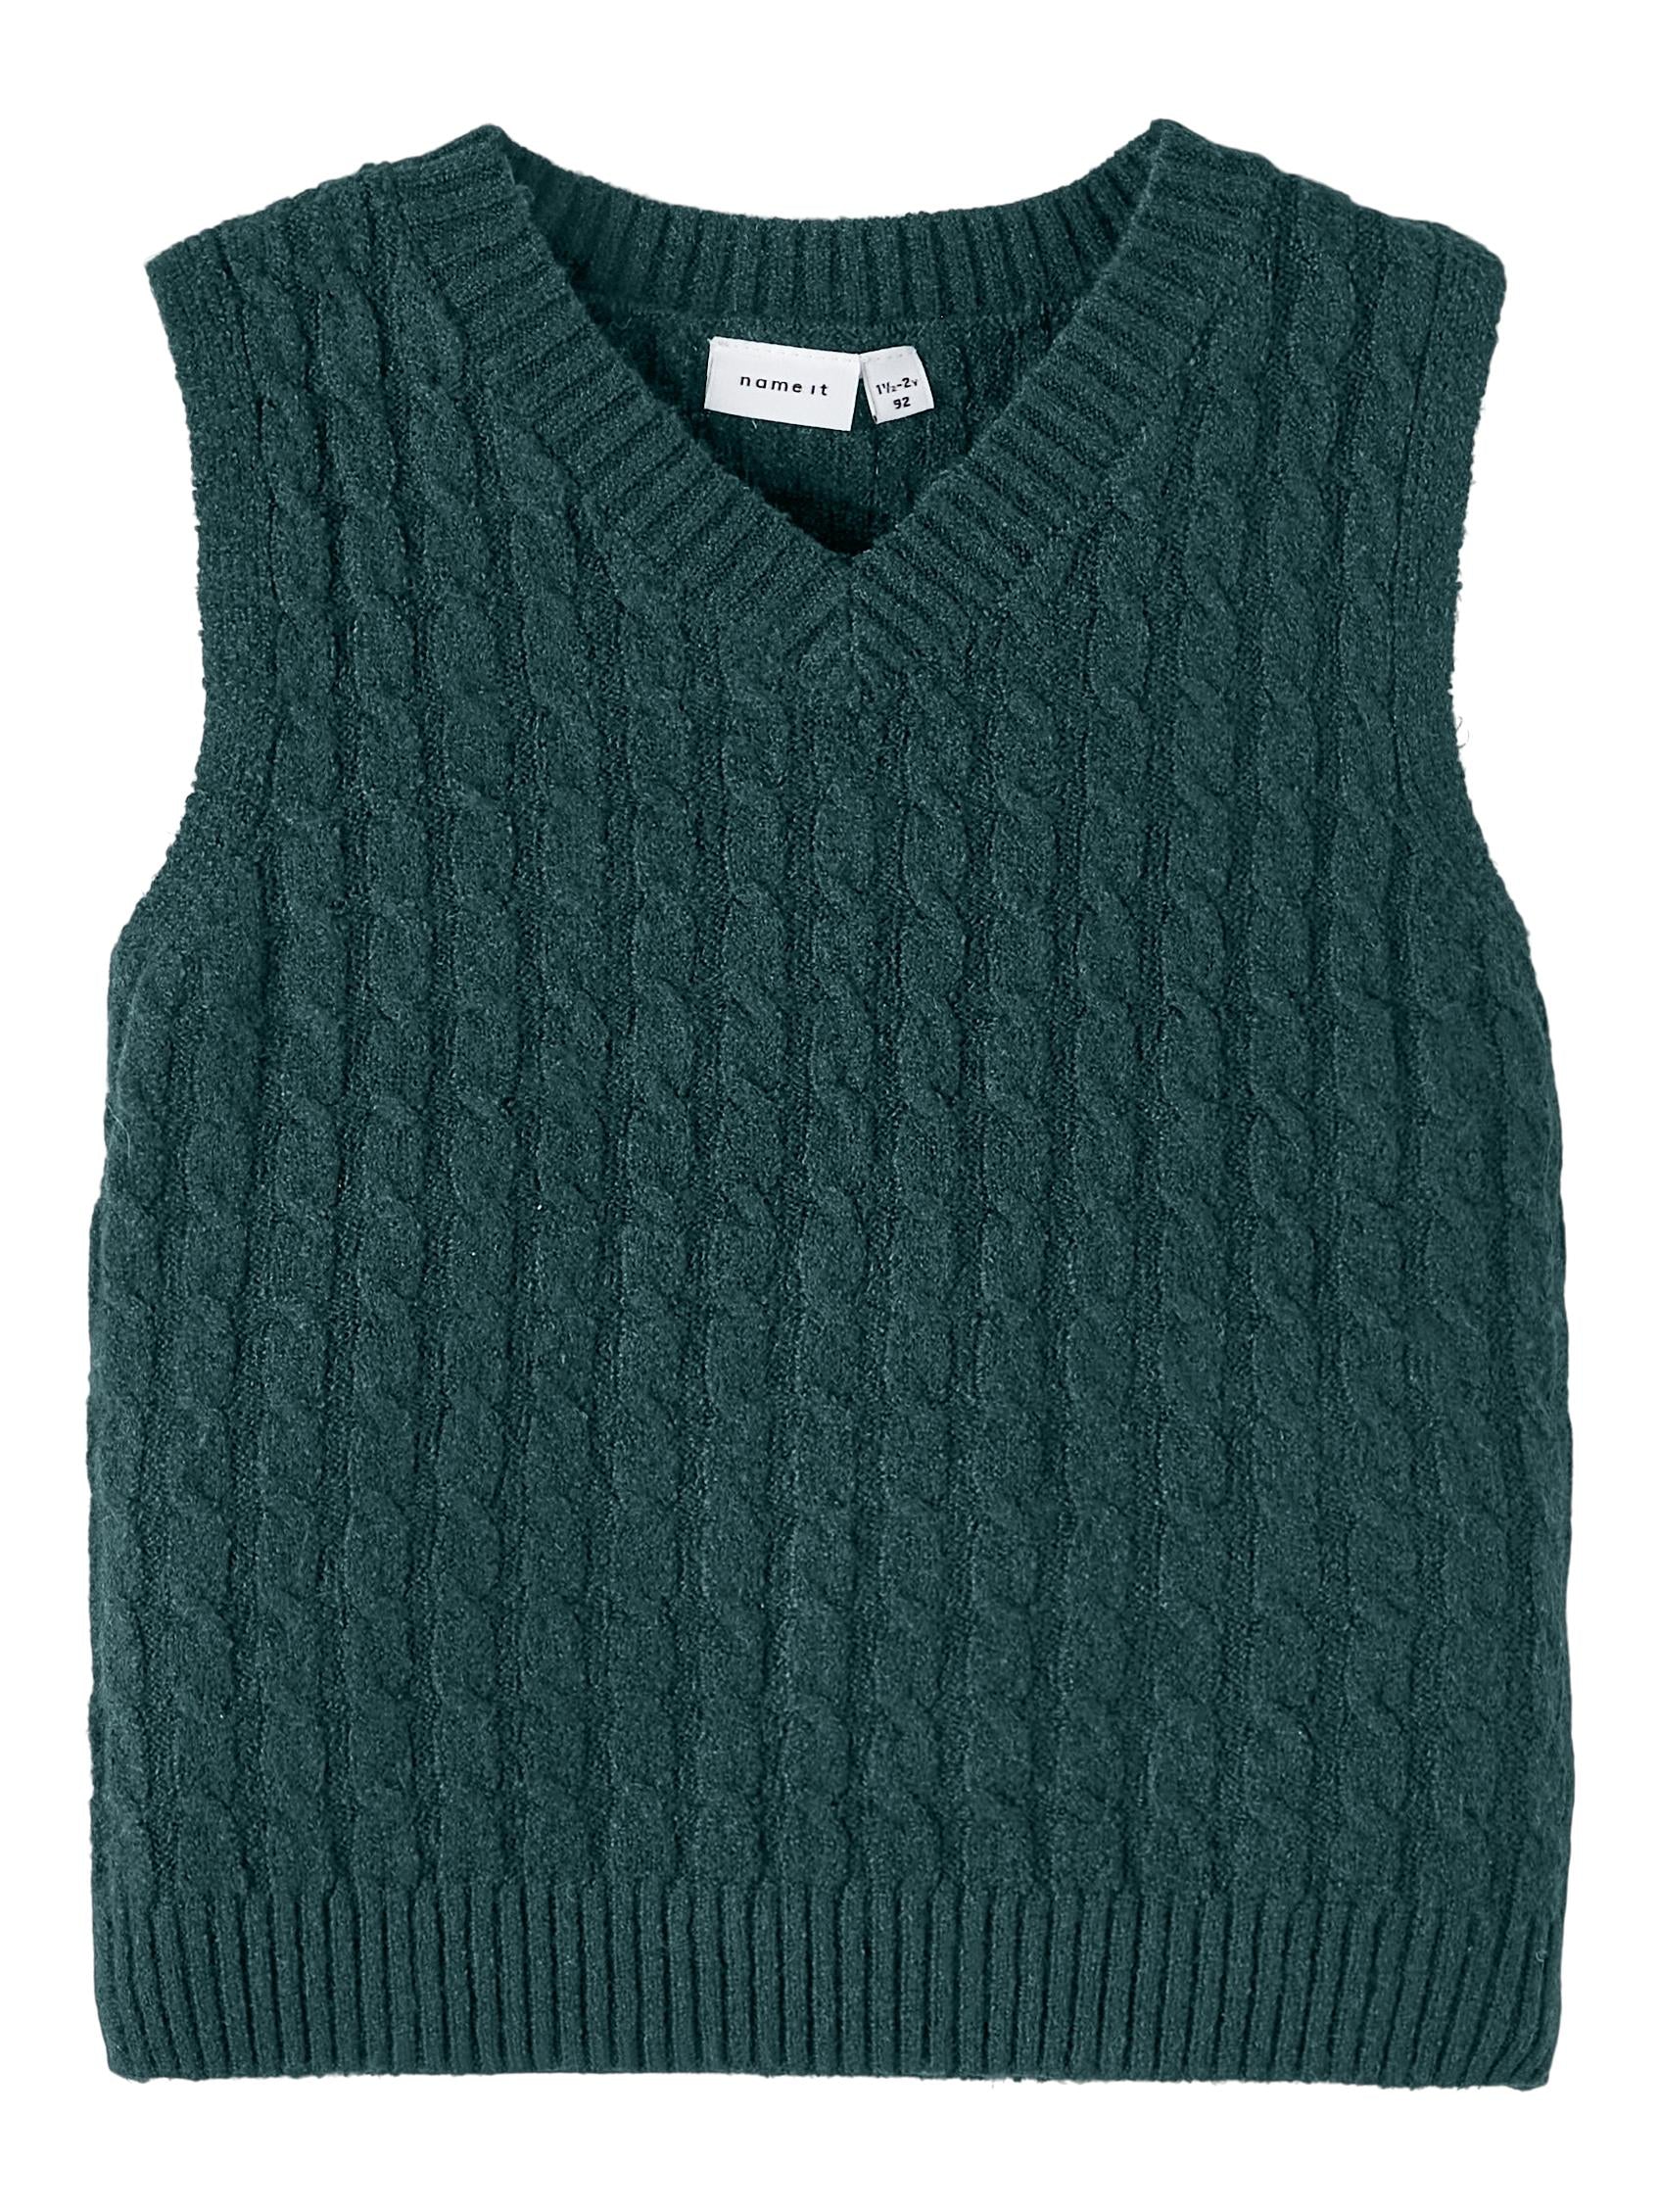 Boy's Sea Moss Rasmo Knit Vest-Front View